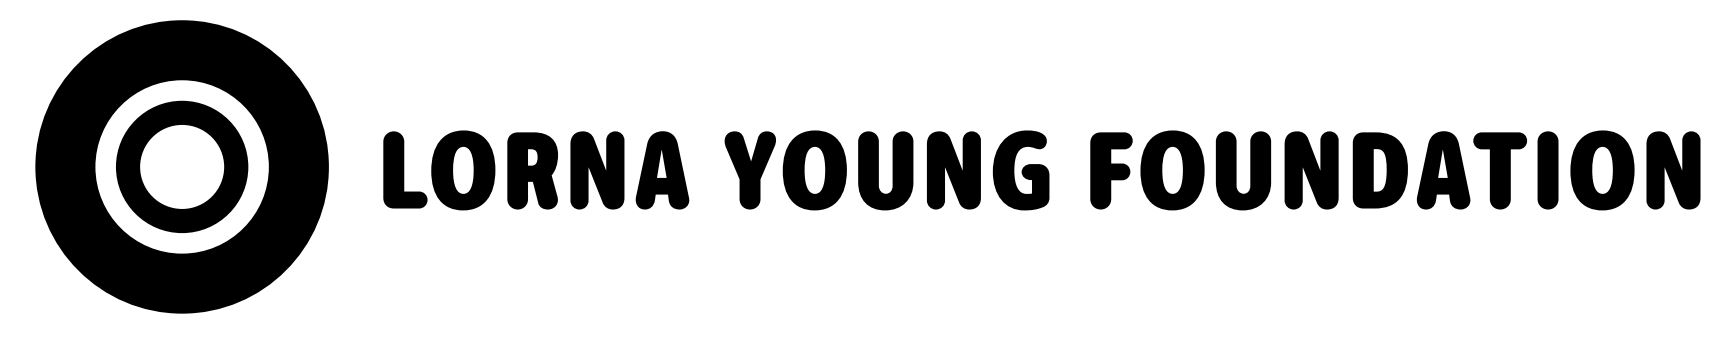 Lorna Young Foundation